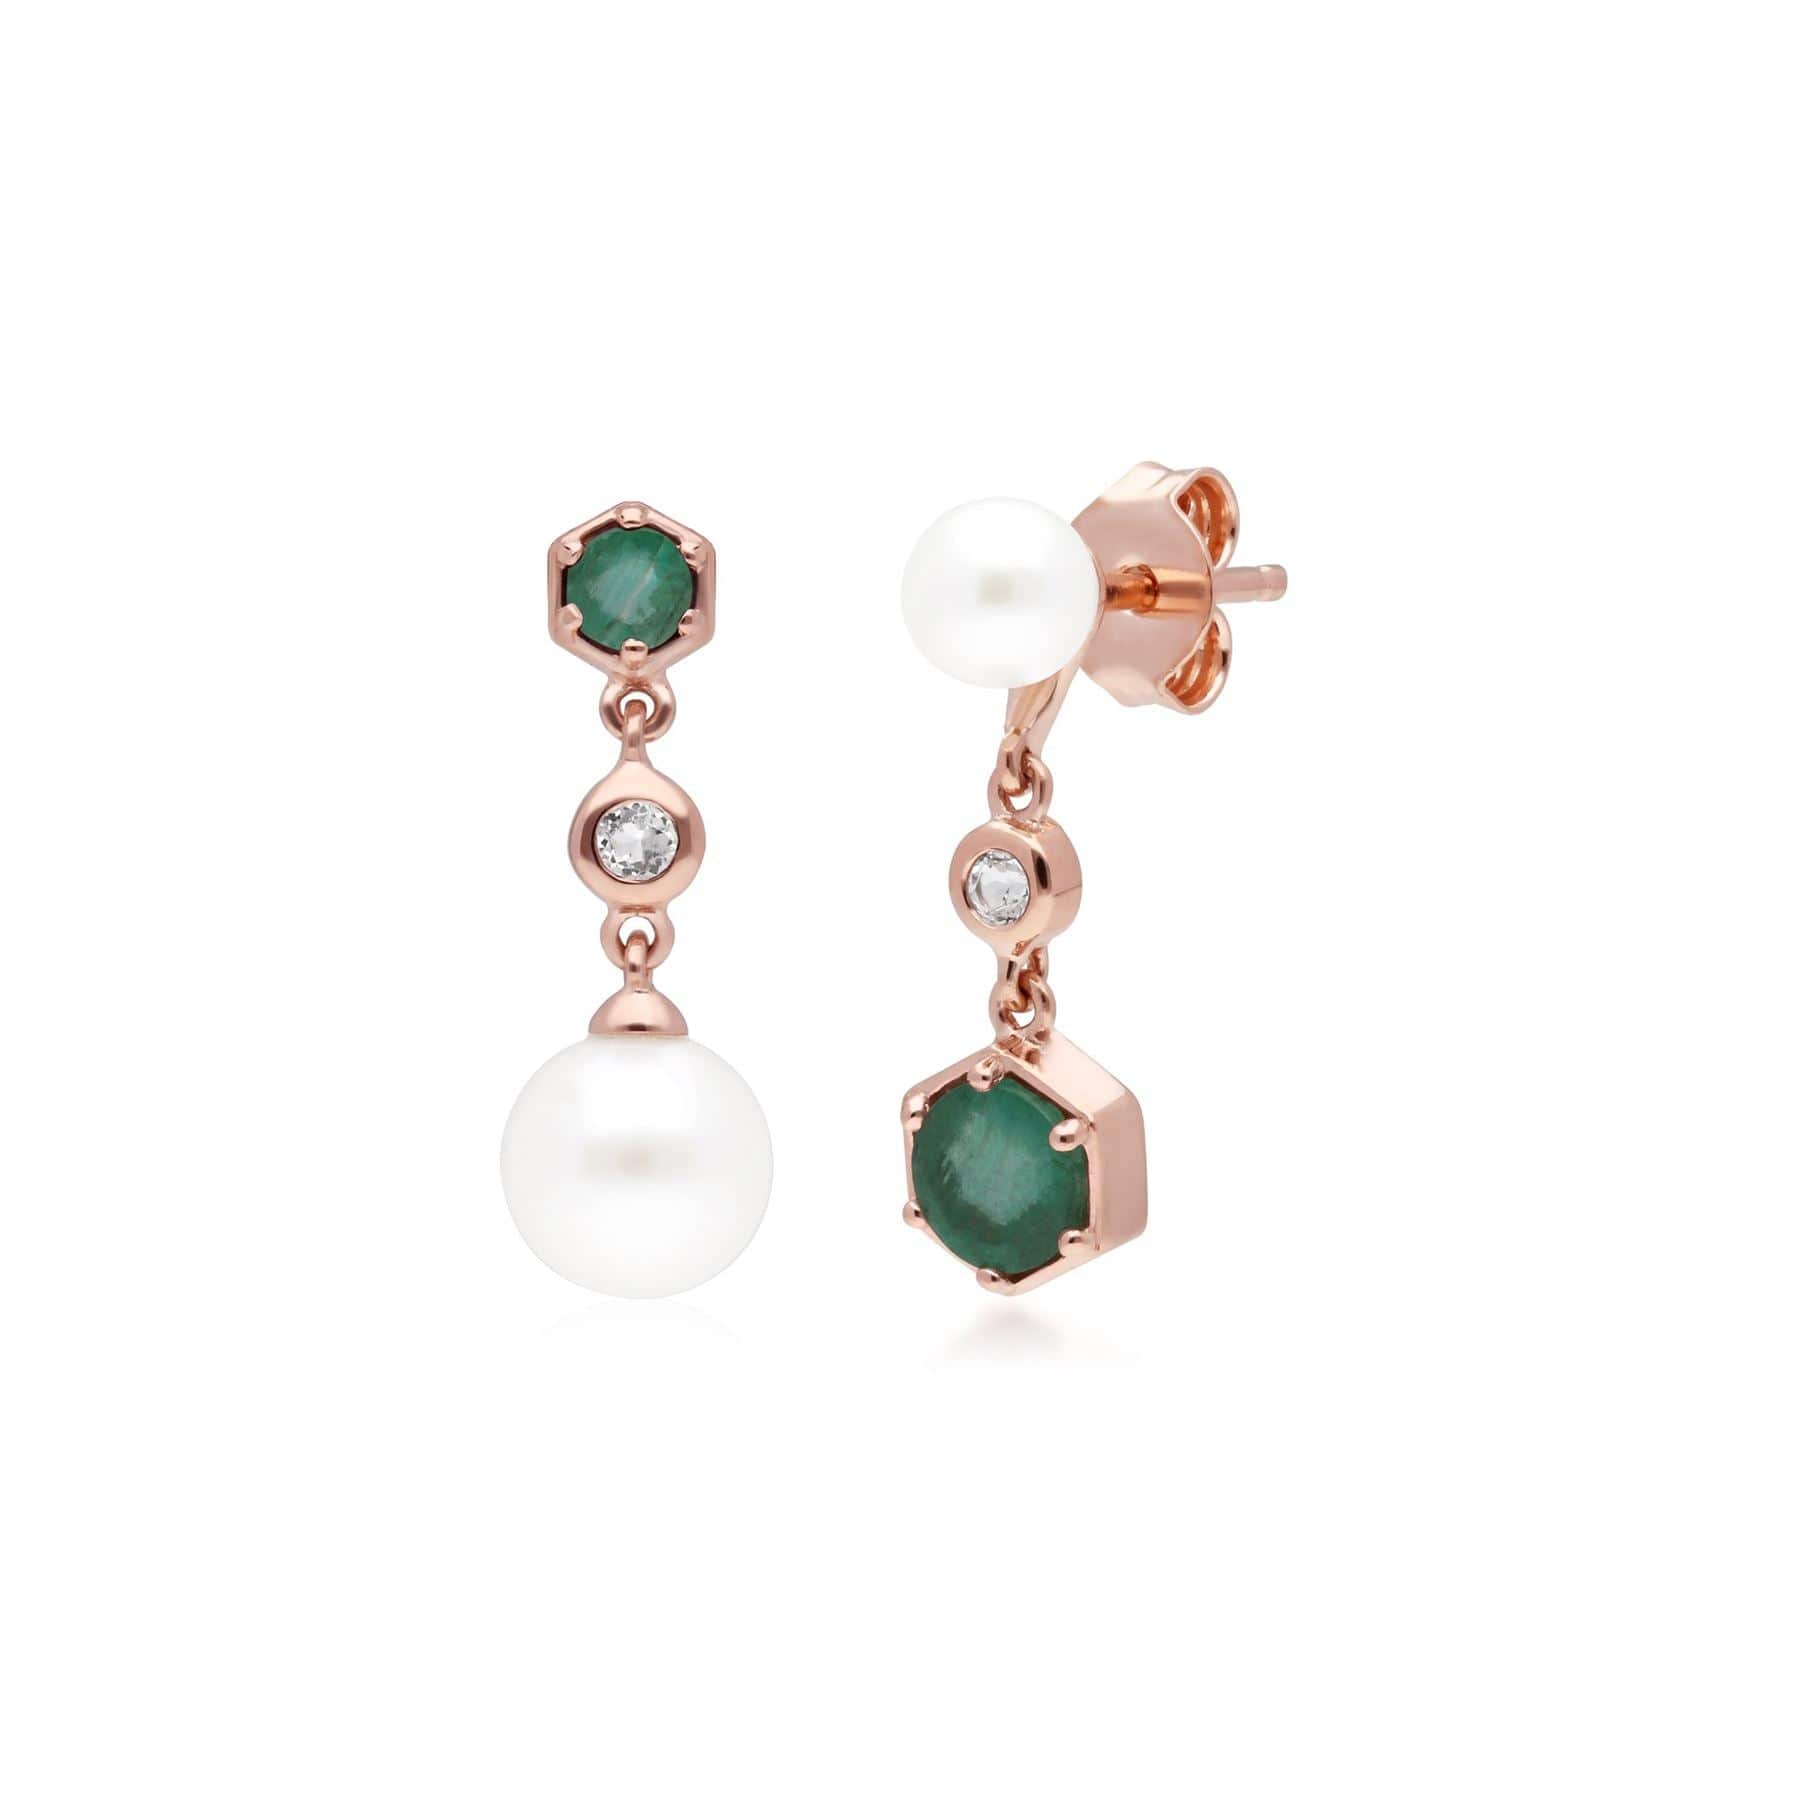 270E030303925 Modern Pearl, Emerald & Topaz Mismatched Drop Earrings in Rose Gold Plated Silver 1